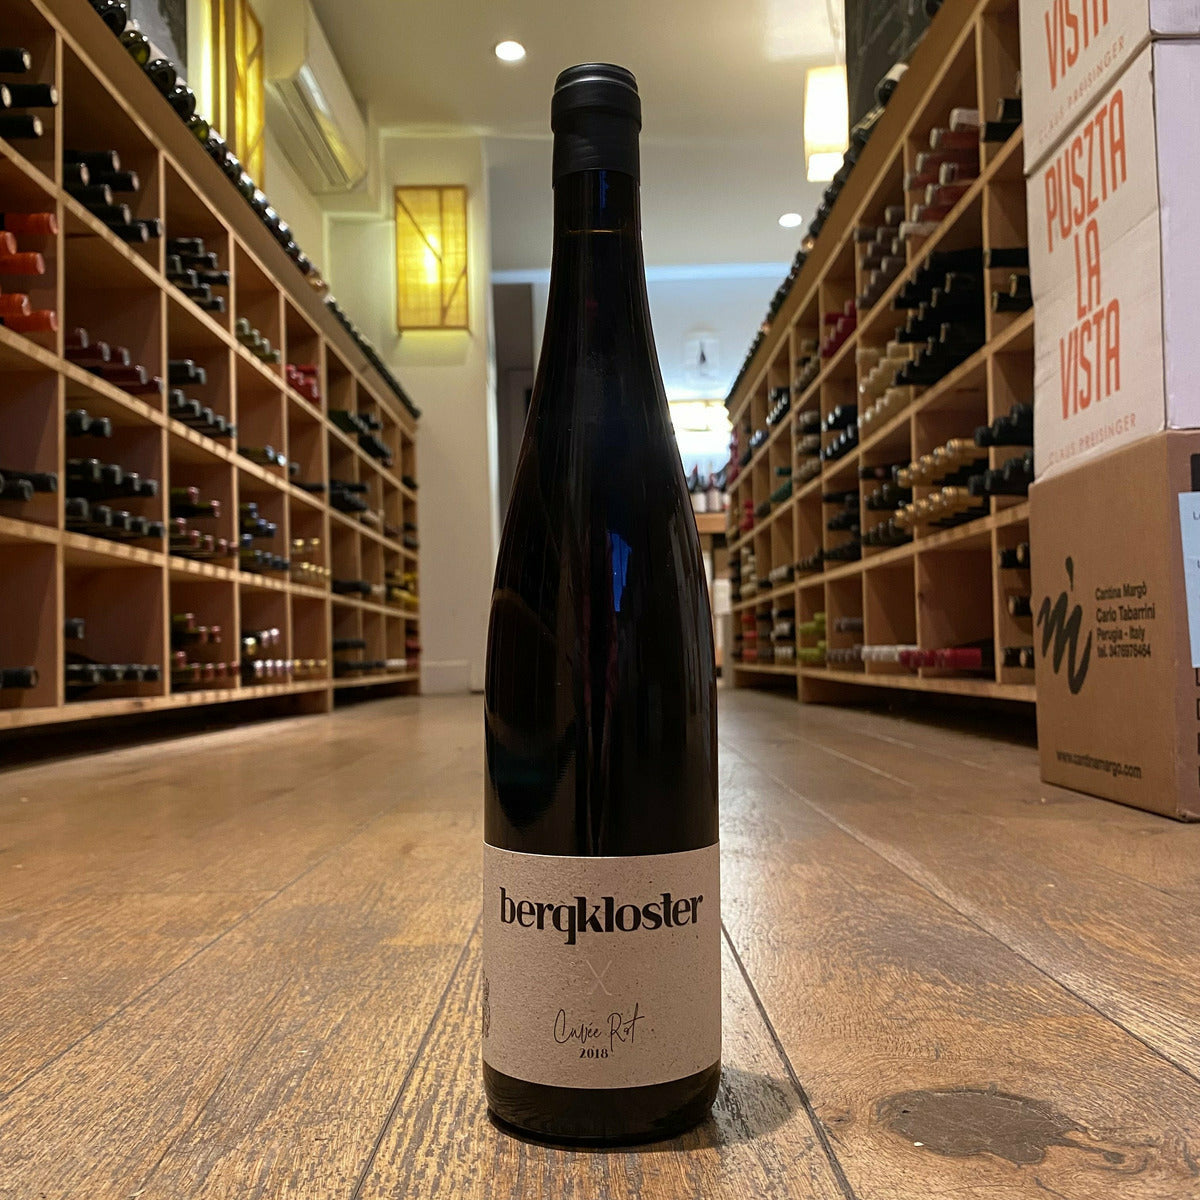 Bergkloster, "Cuvée Rot" 2019